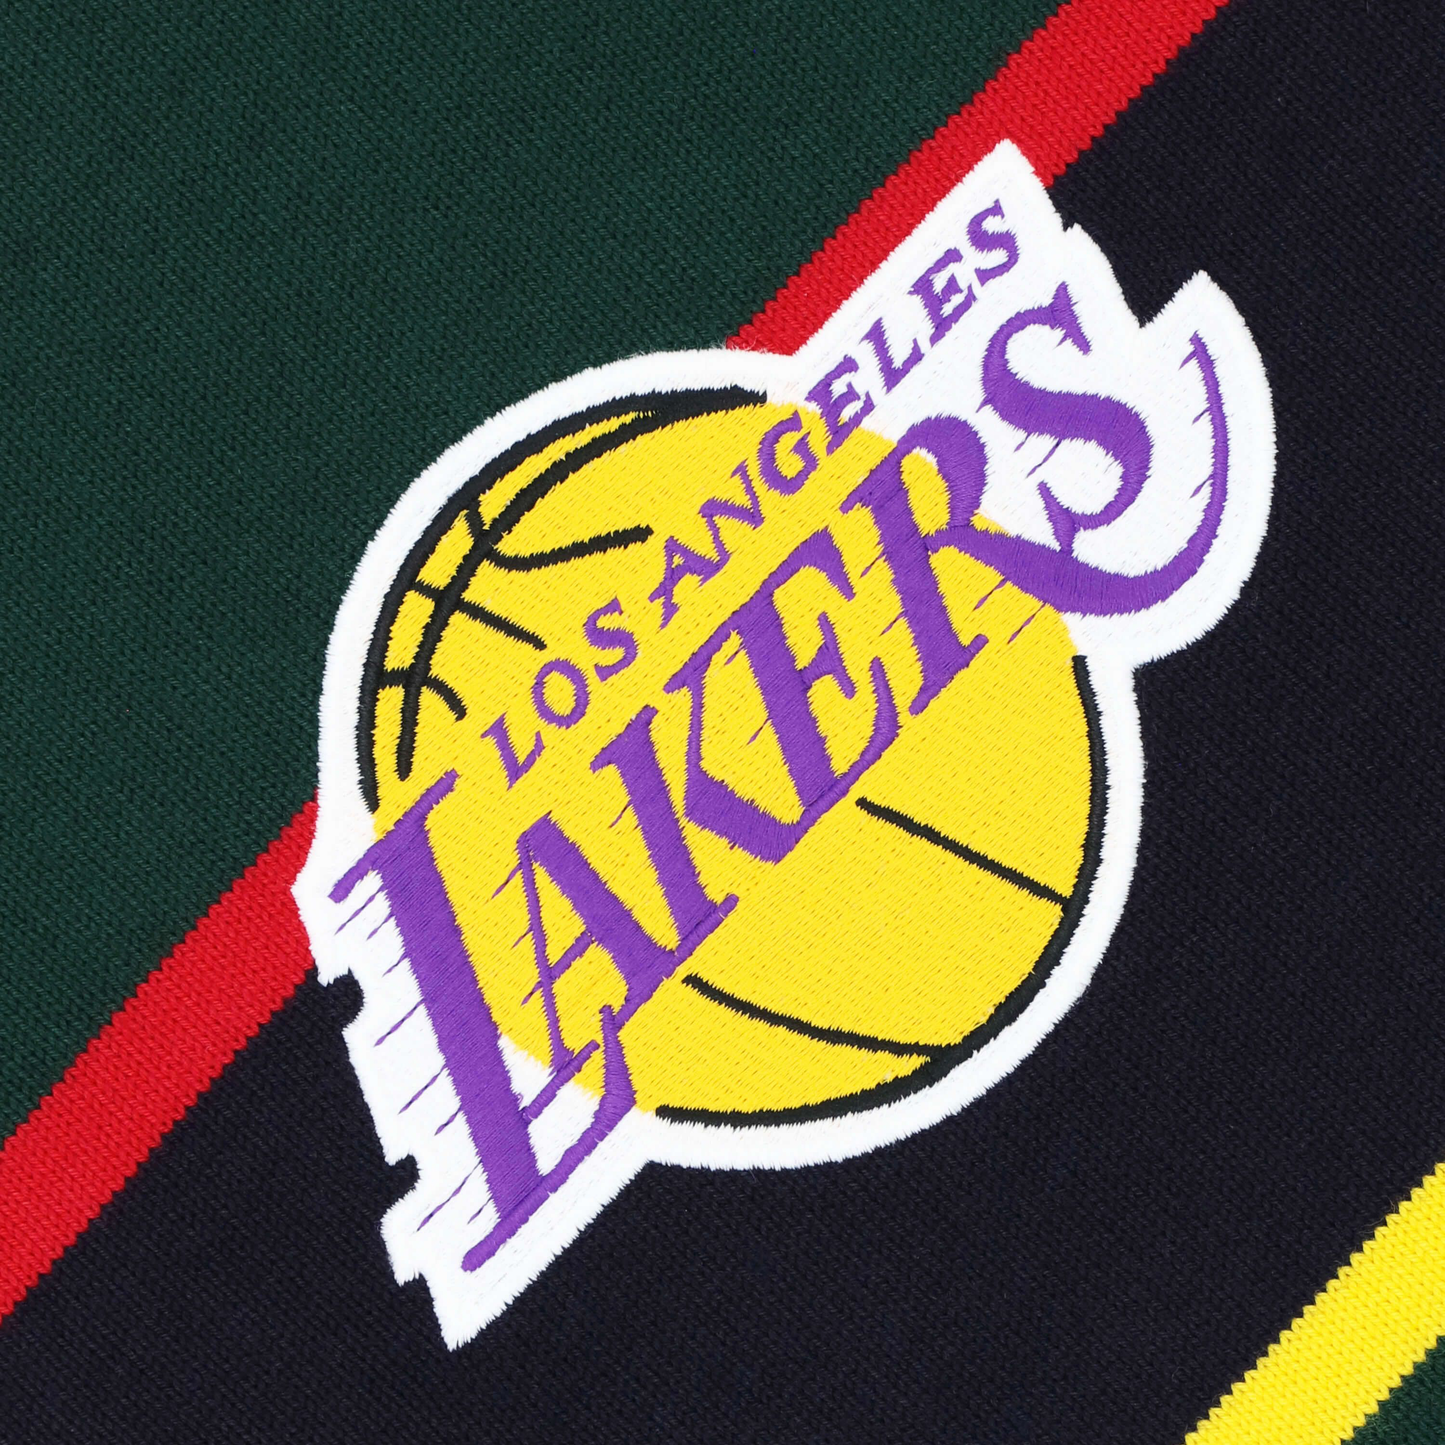 Rowing Blazers x NBA Los Angeles Lakers Rugby Shirt